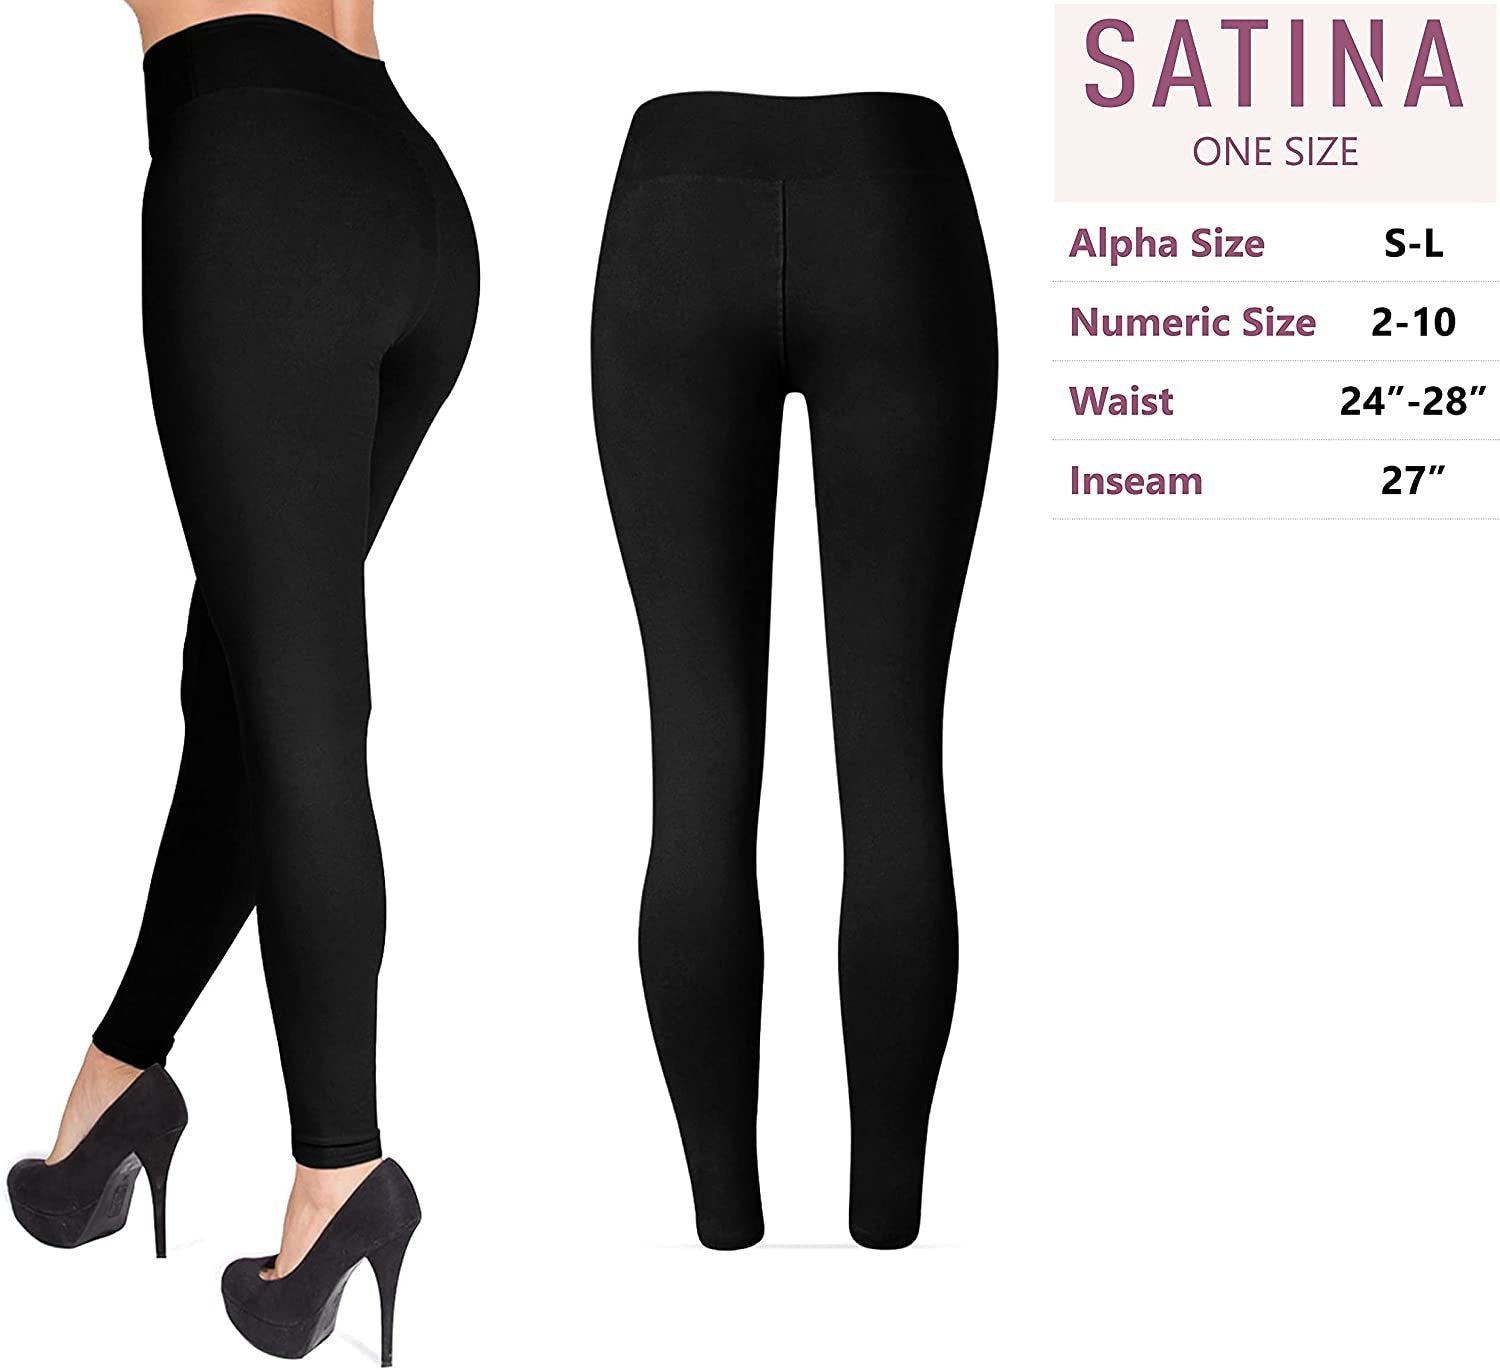 New SATINA Black Yoga Leggings with Pockets Super Soft | High Waisted, Plus Size